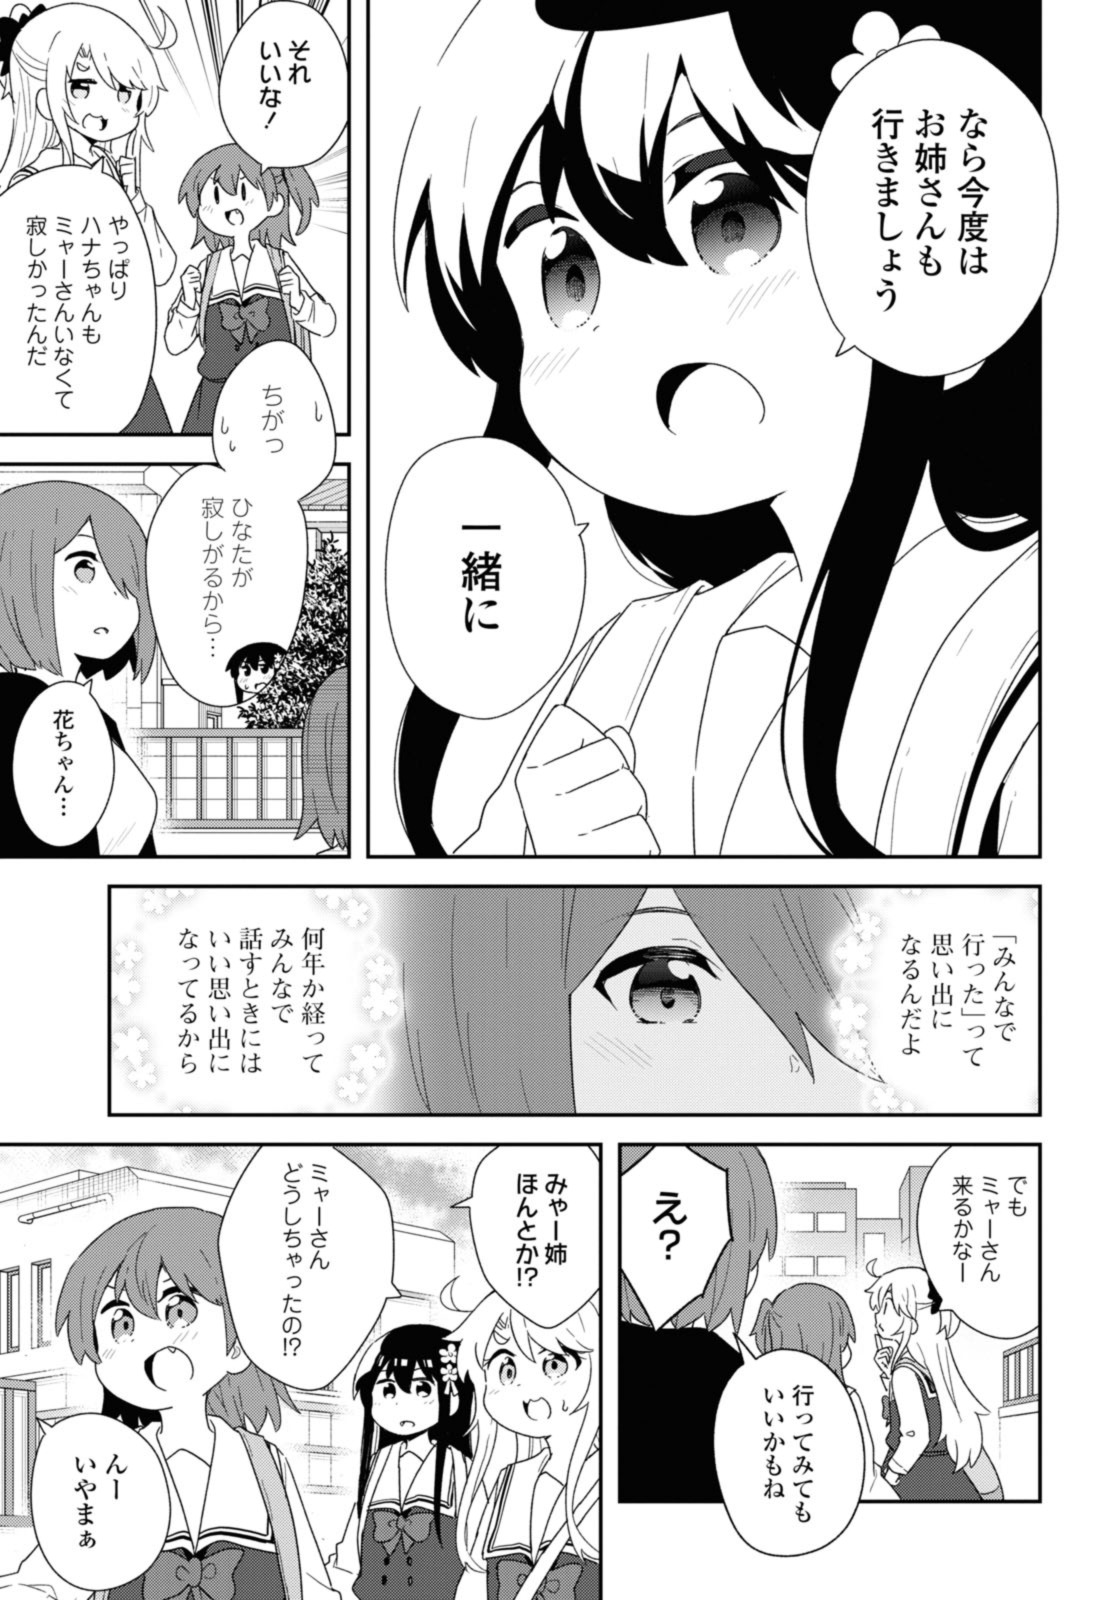 Wataten! An Angel Flew Down to Me 私に天使が舞い降りた！ 第107話 - Page 15